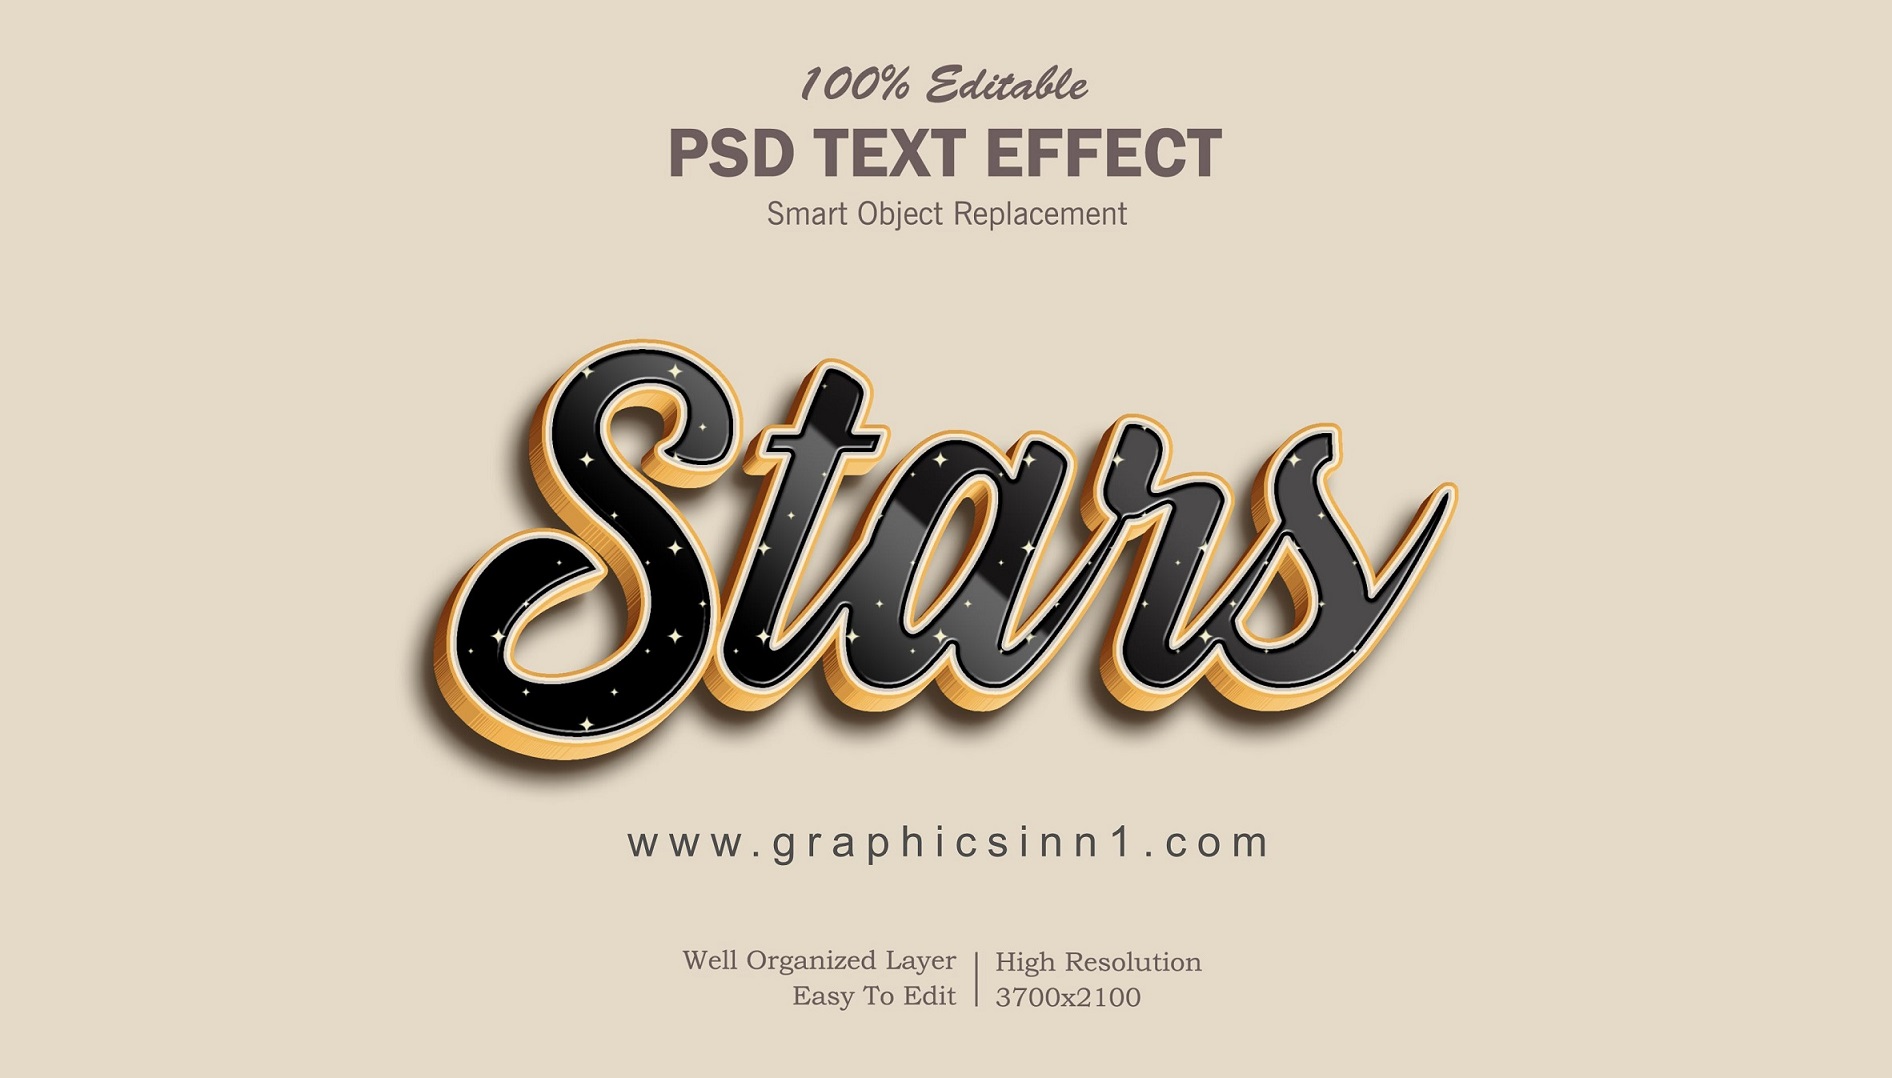 Stars Stylish Psd Editable Text Effect Free Download